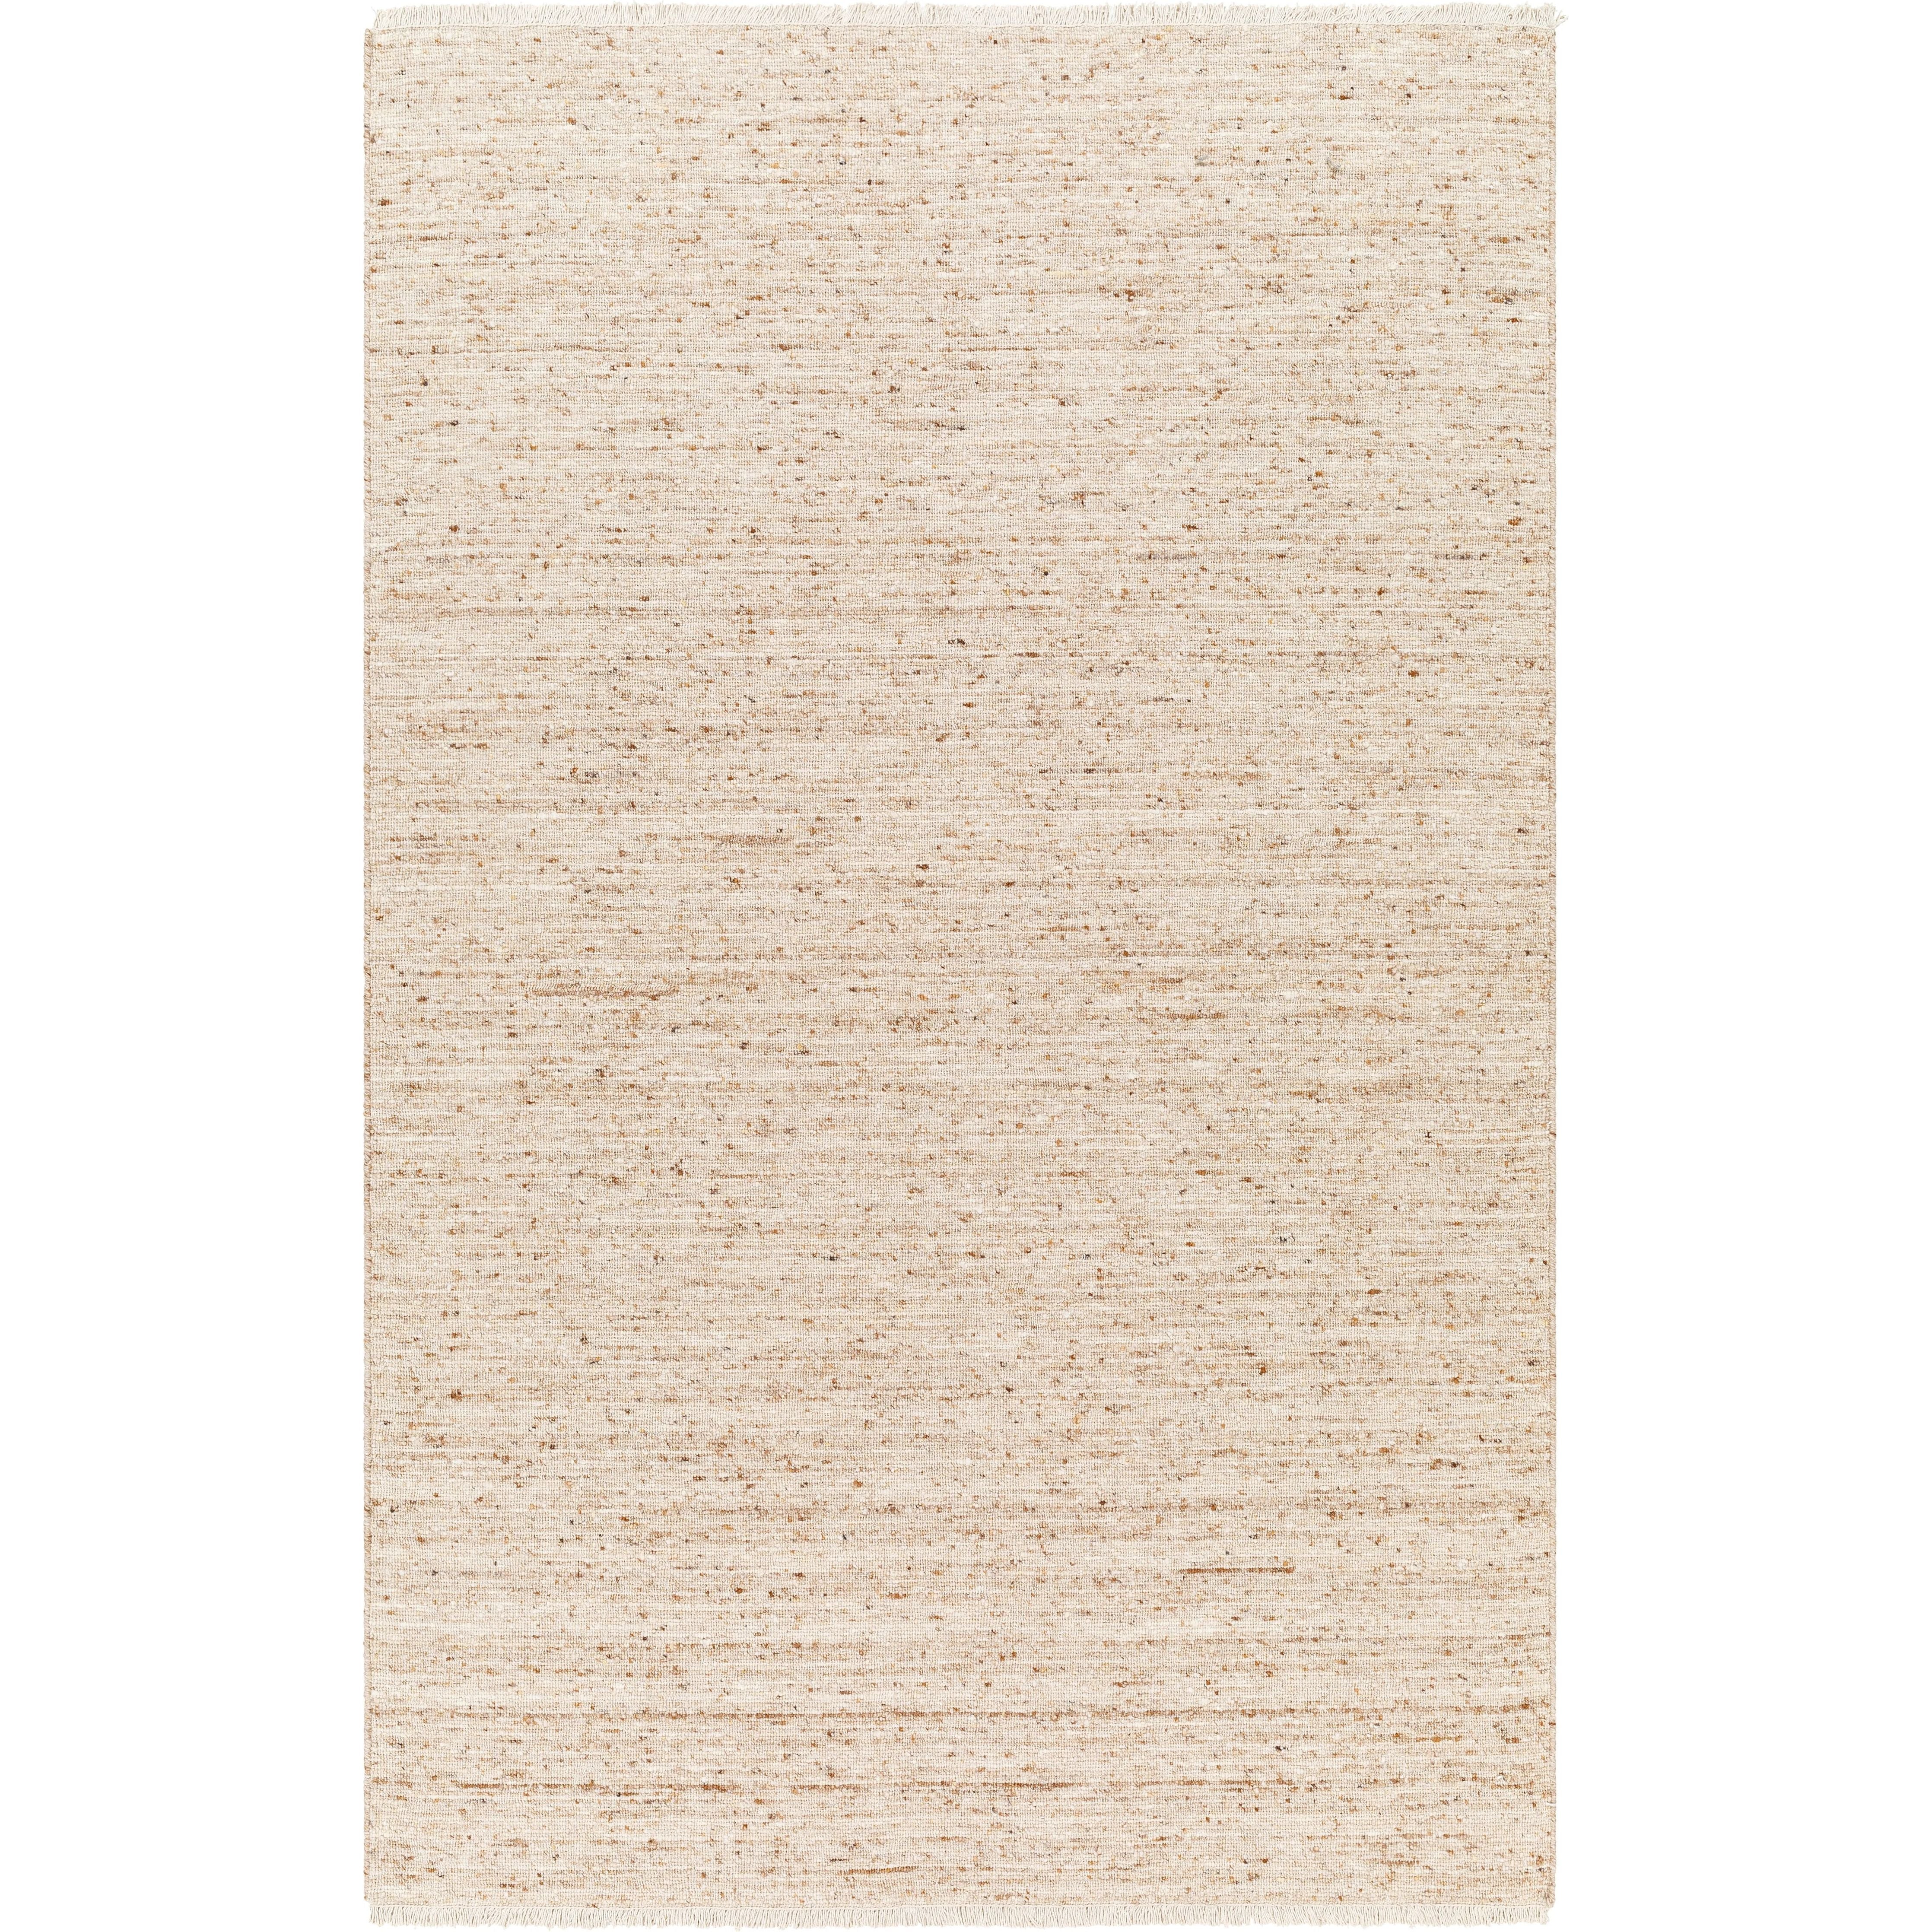 A modern, heathered warm beige look.  This is a great rug if you have other dominant design features in a space like a striking fireplace or standout patterns Amethyst Home provides interior design, new home construction design consulting, vintage area rugs, and lighting in the San Diego metro area.